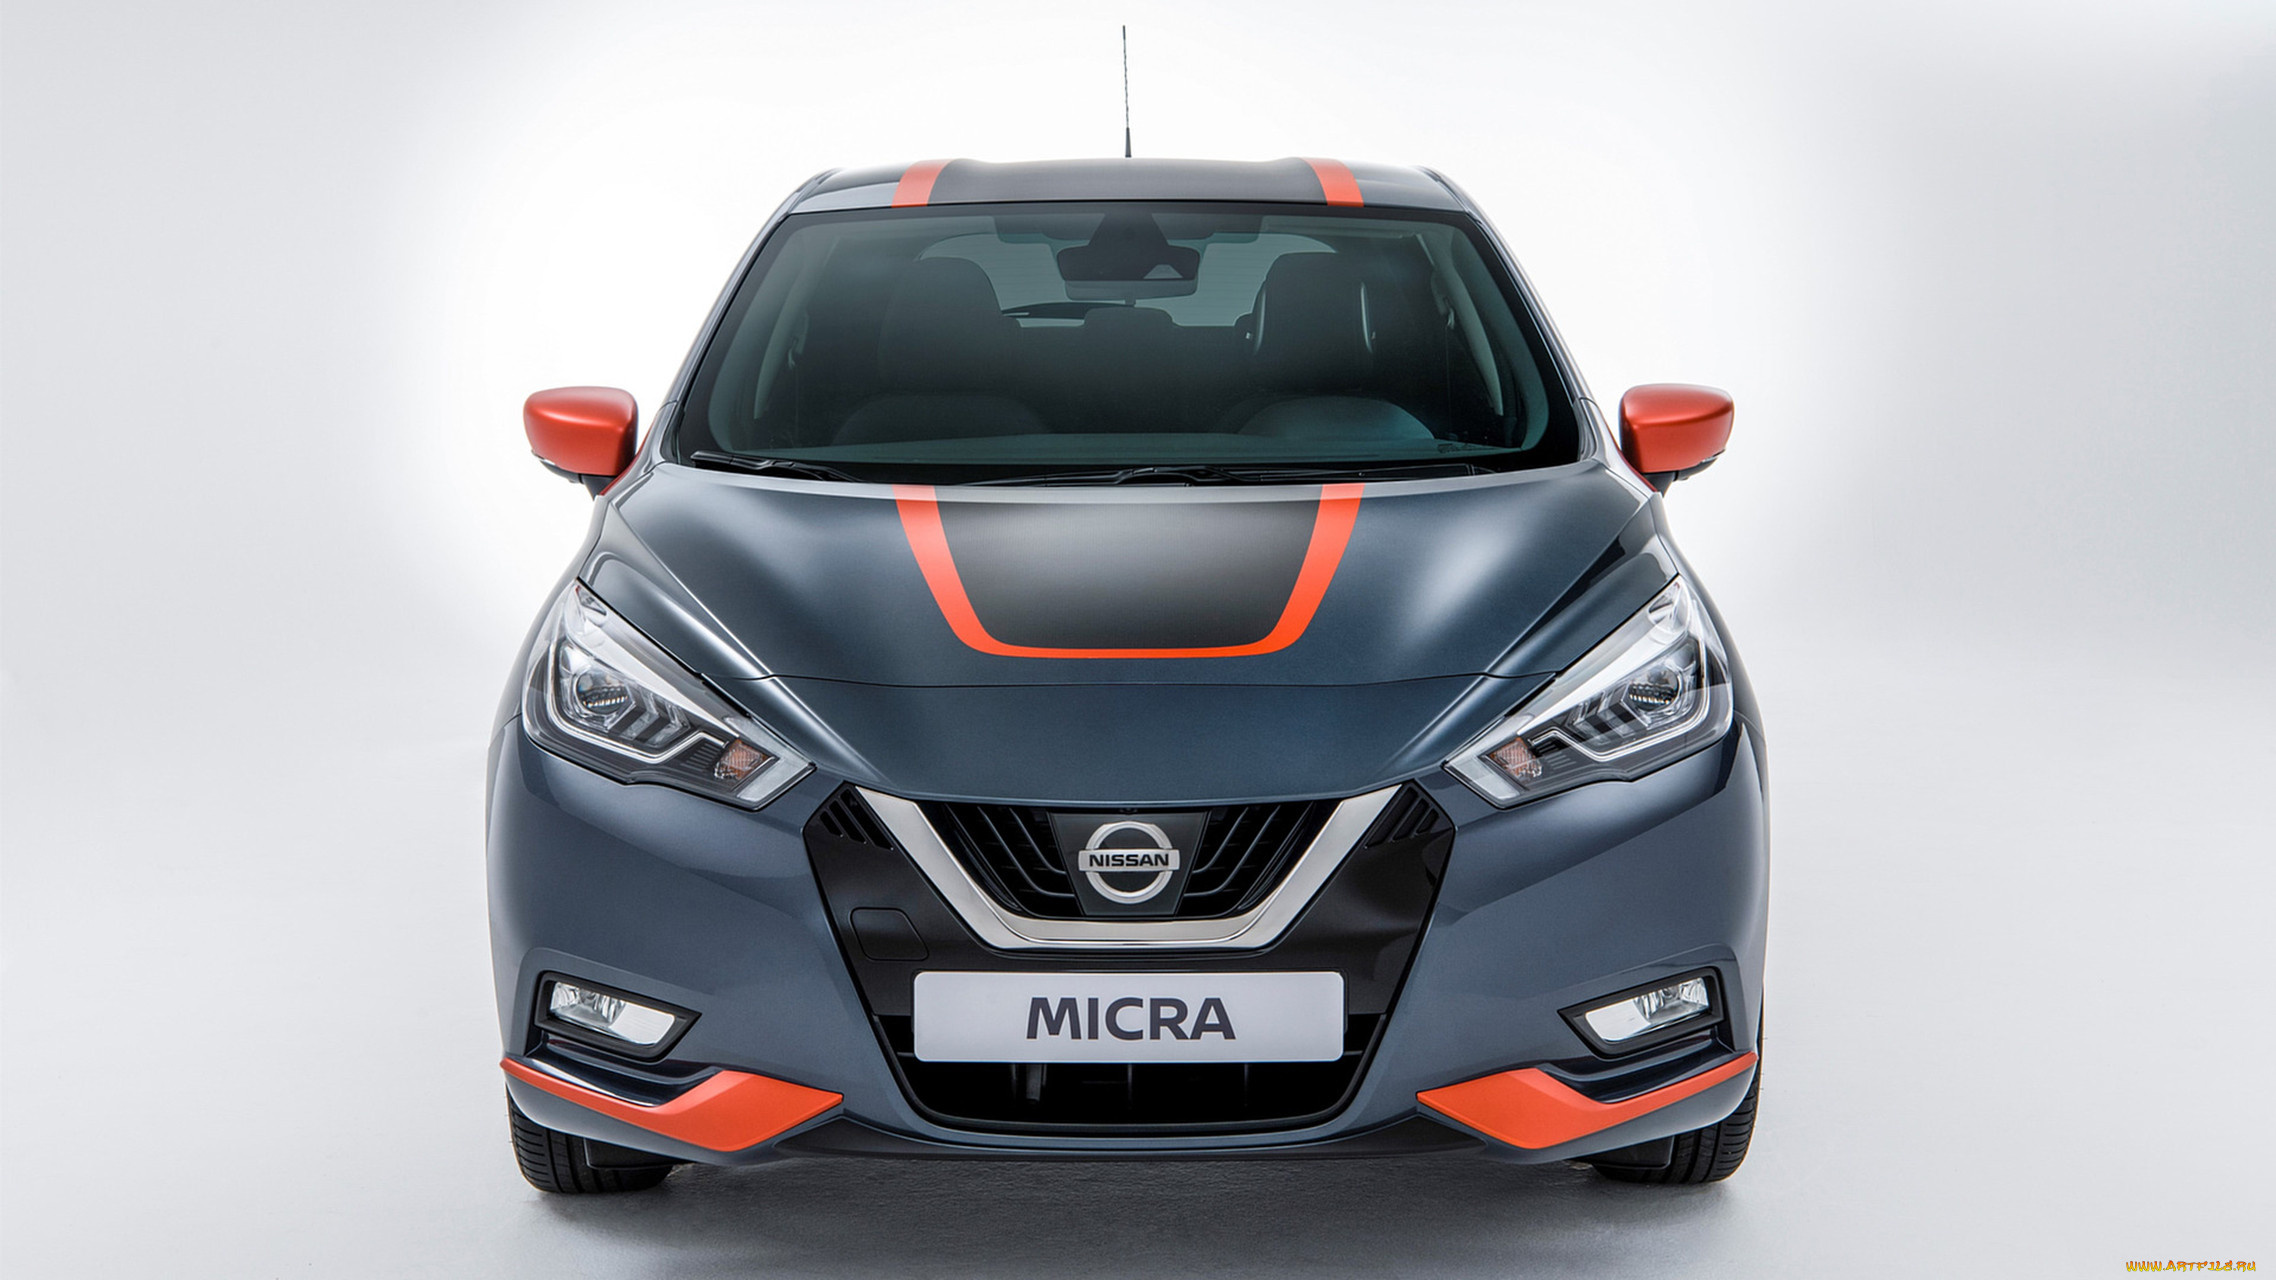 nissan micra bose personal edition 2017, , nissan, datsun, 2017, edition, personal, bose, micra